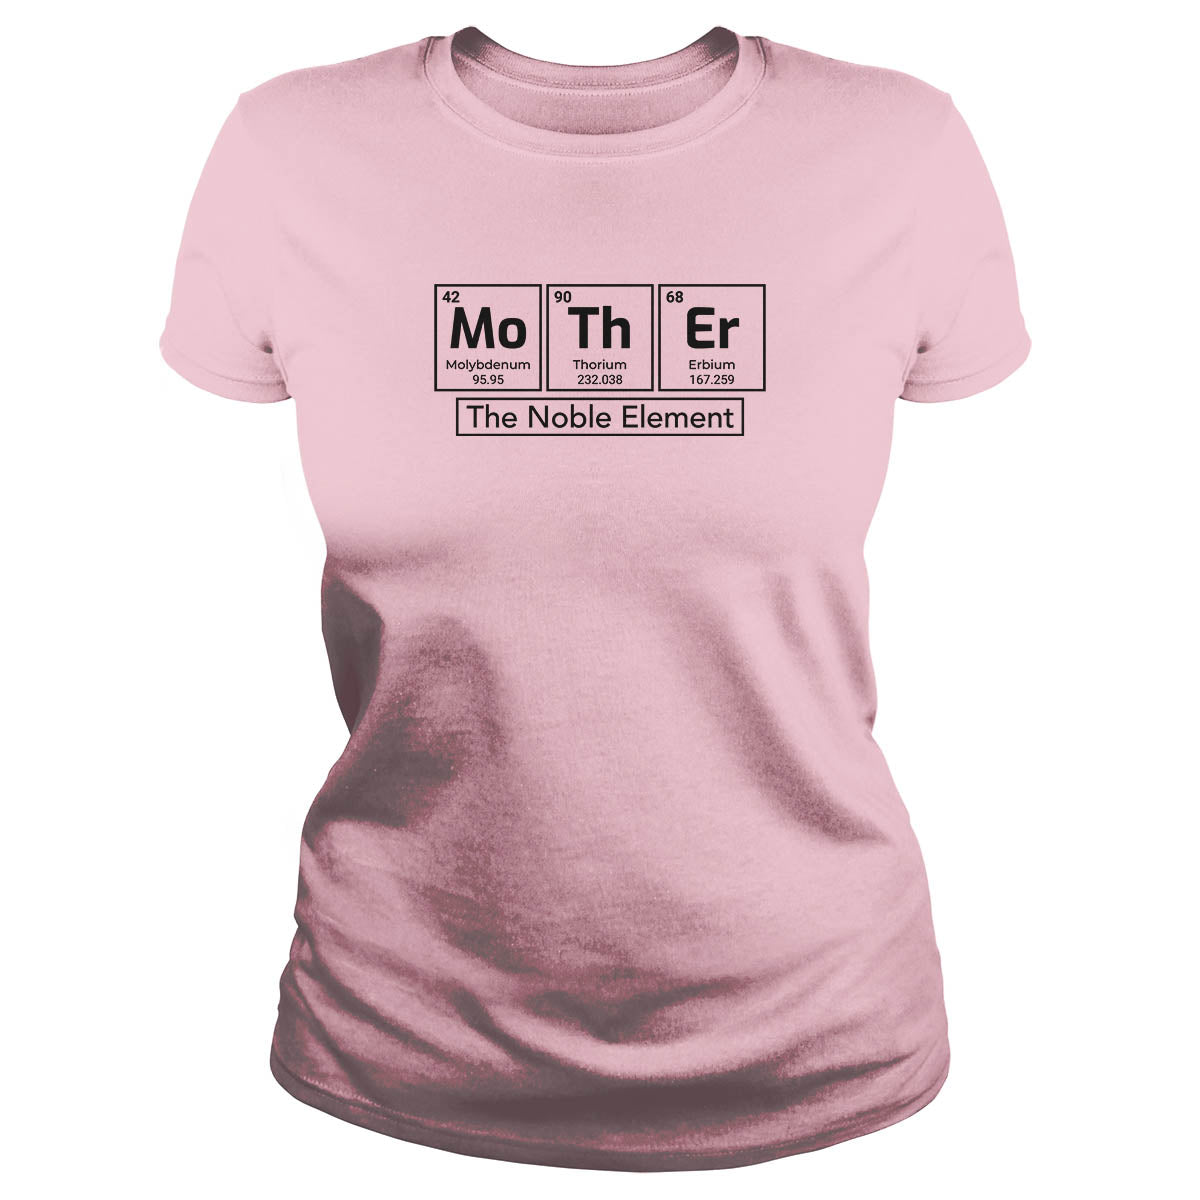 MOTHER, The Noble Element